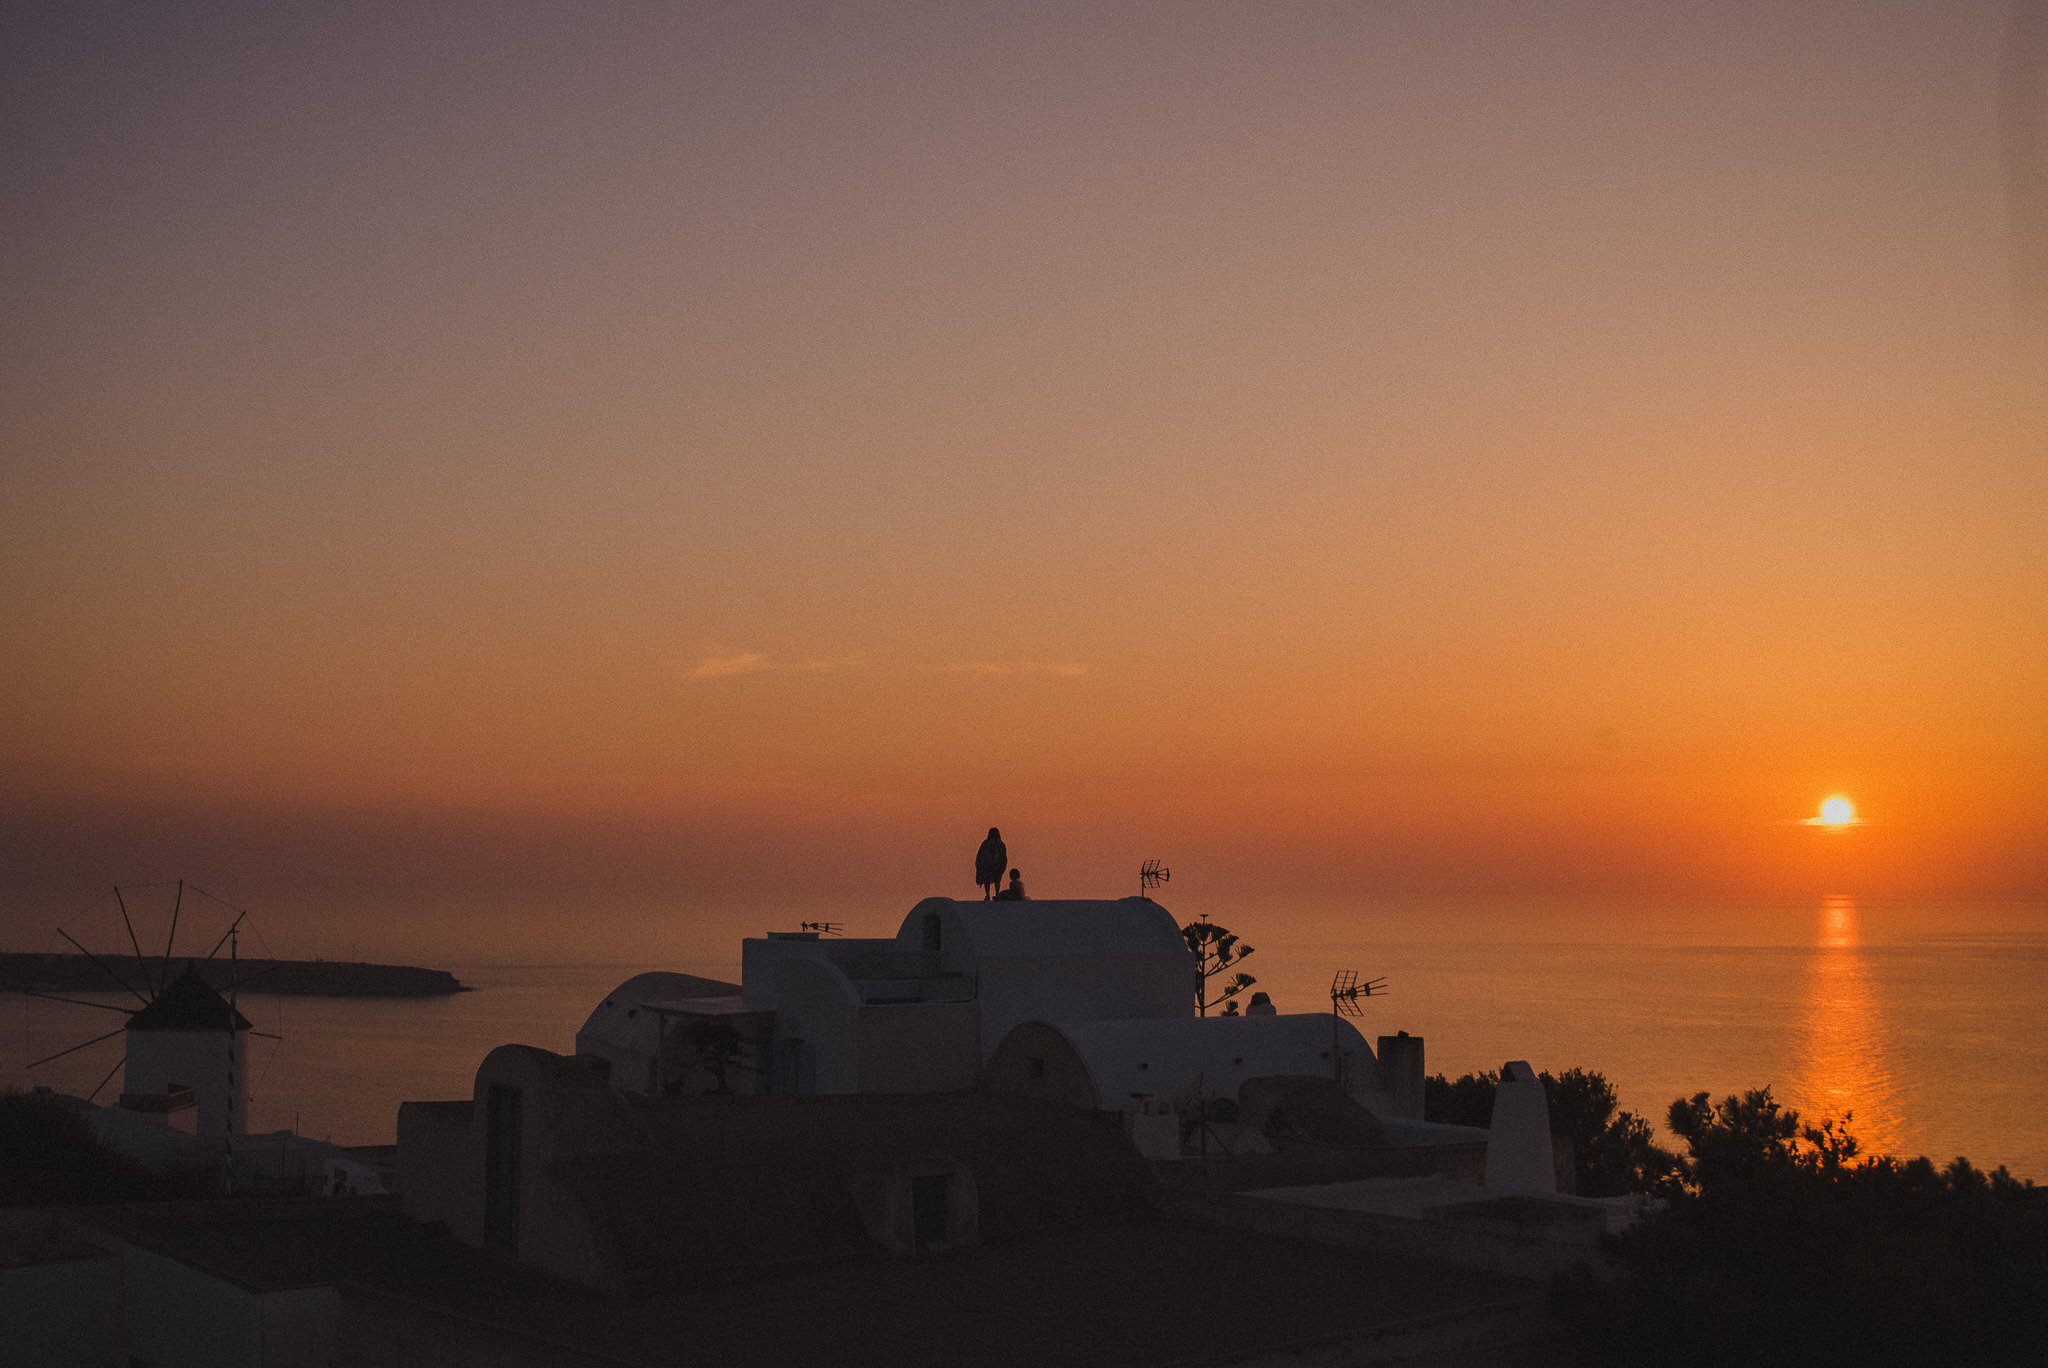 Oia at sunset. I'm stood on the roof of Marcos Rooms - a great place away from the crowds.